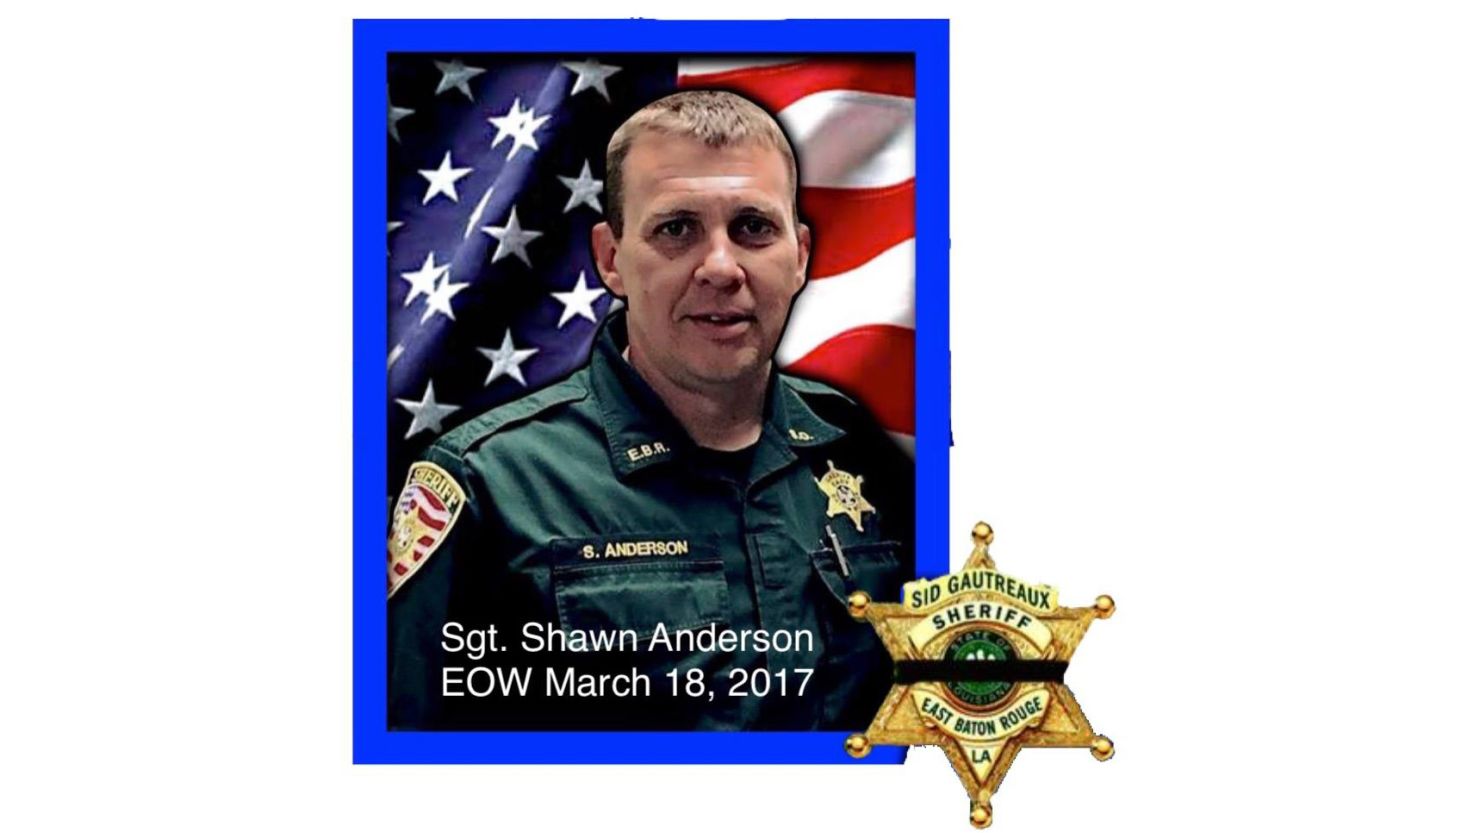 Sgt Shawn Anderson of the East Baton Rouge Parish Sheriff's Office was killed Saturday night.